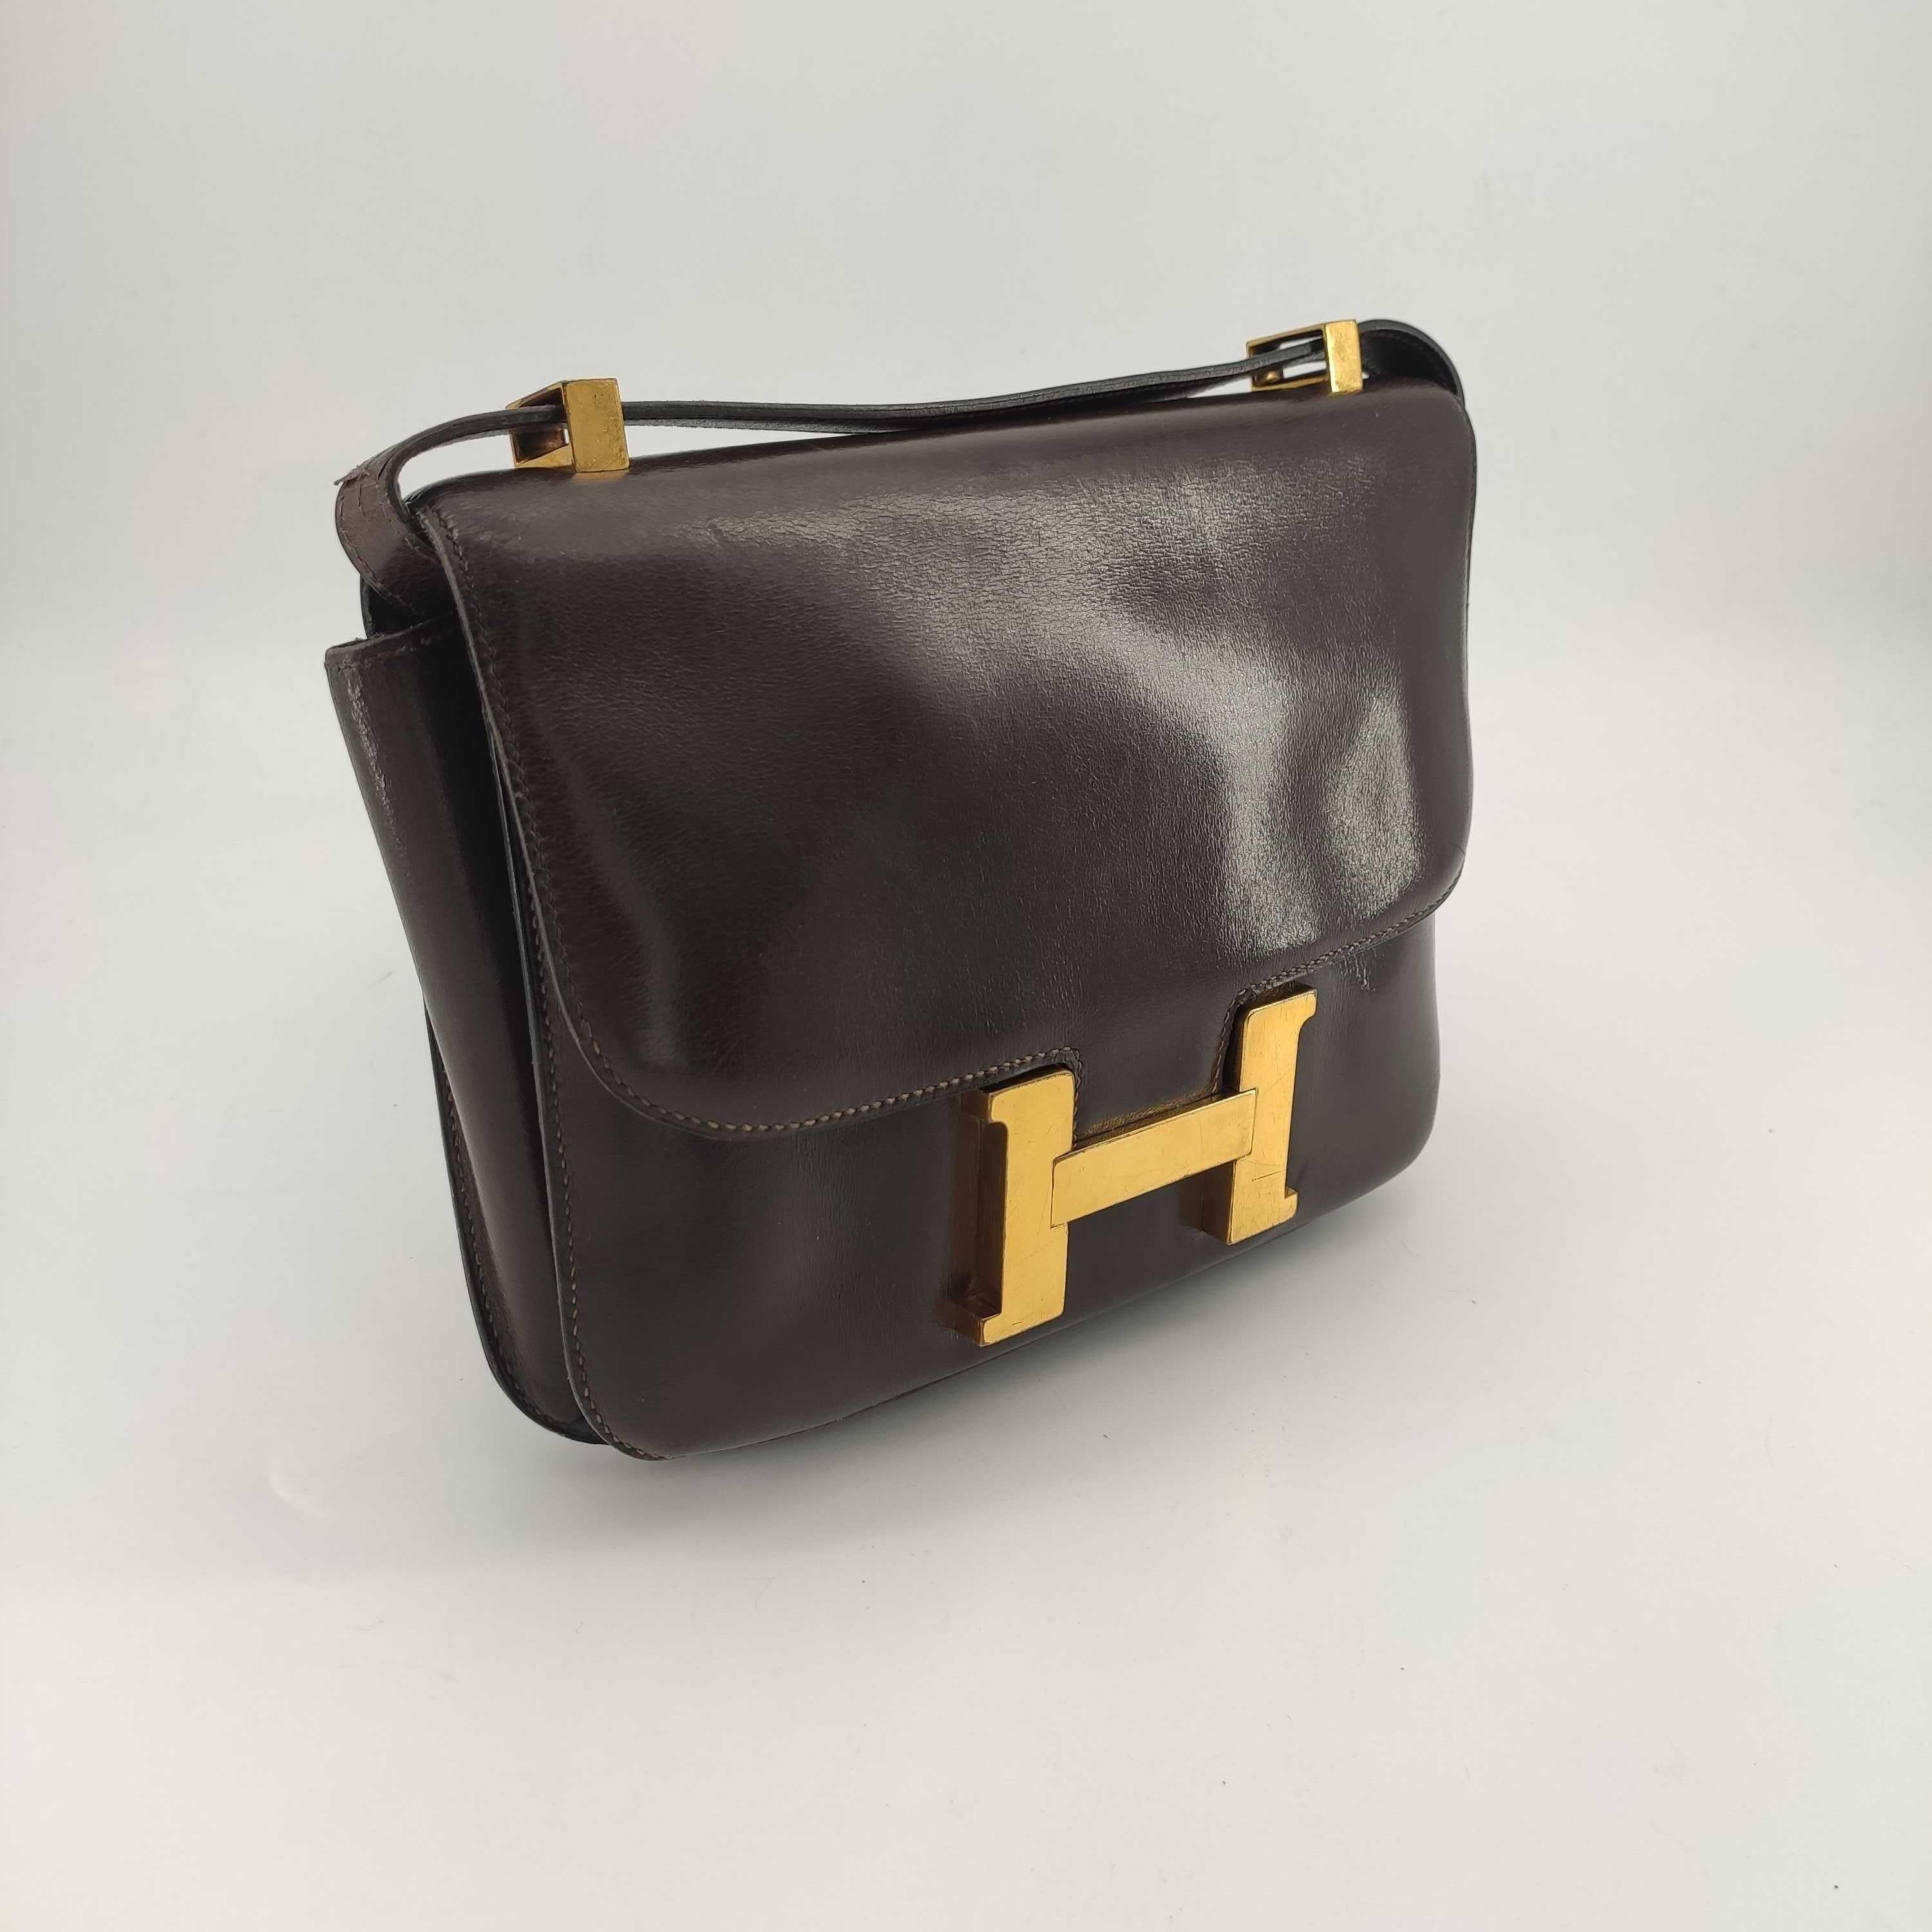 - Designer: HERMÈS
- Model: Constance
- Condition: Good condition. Scratches on the clasp, Sign of wear on base corners, Sign of wear on Leather
- Accessories: None
- Measurements: Width: 23cm, Height: 18cm, Depth: 4cm, Strap: 98cm
- Exterior